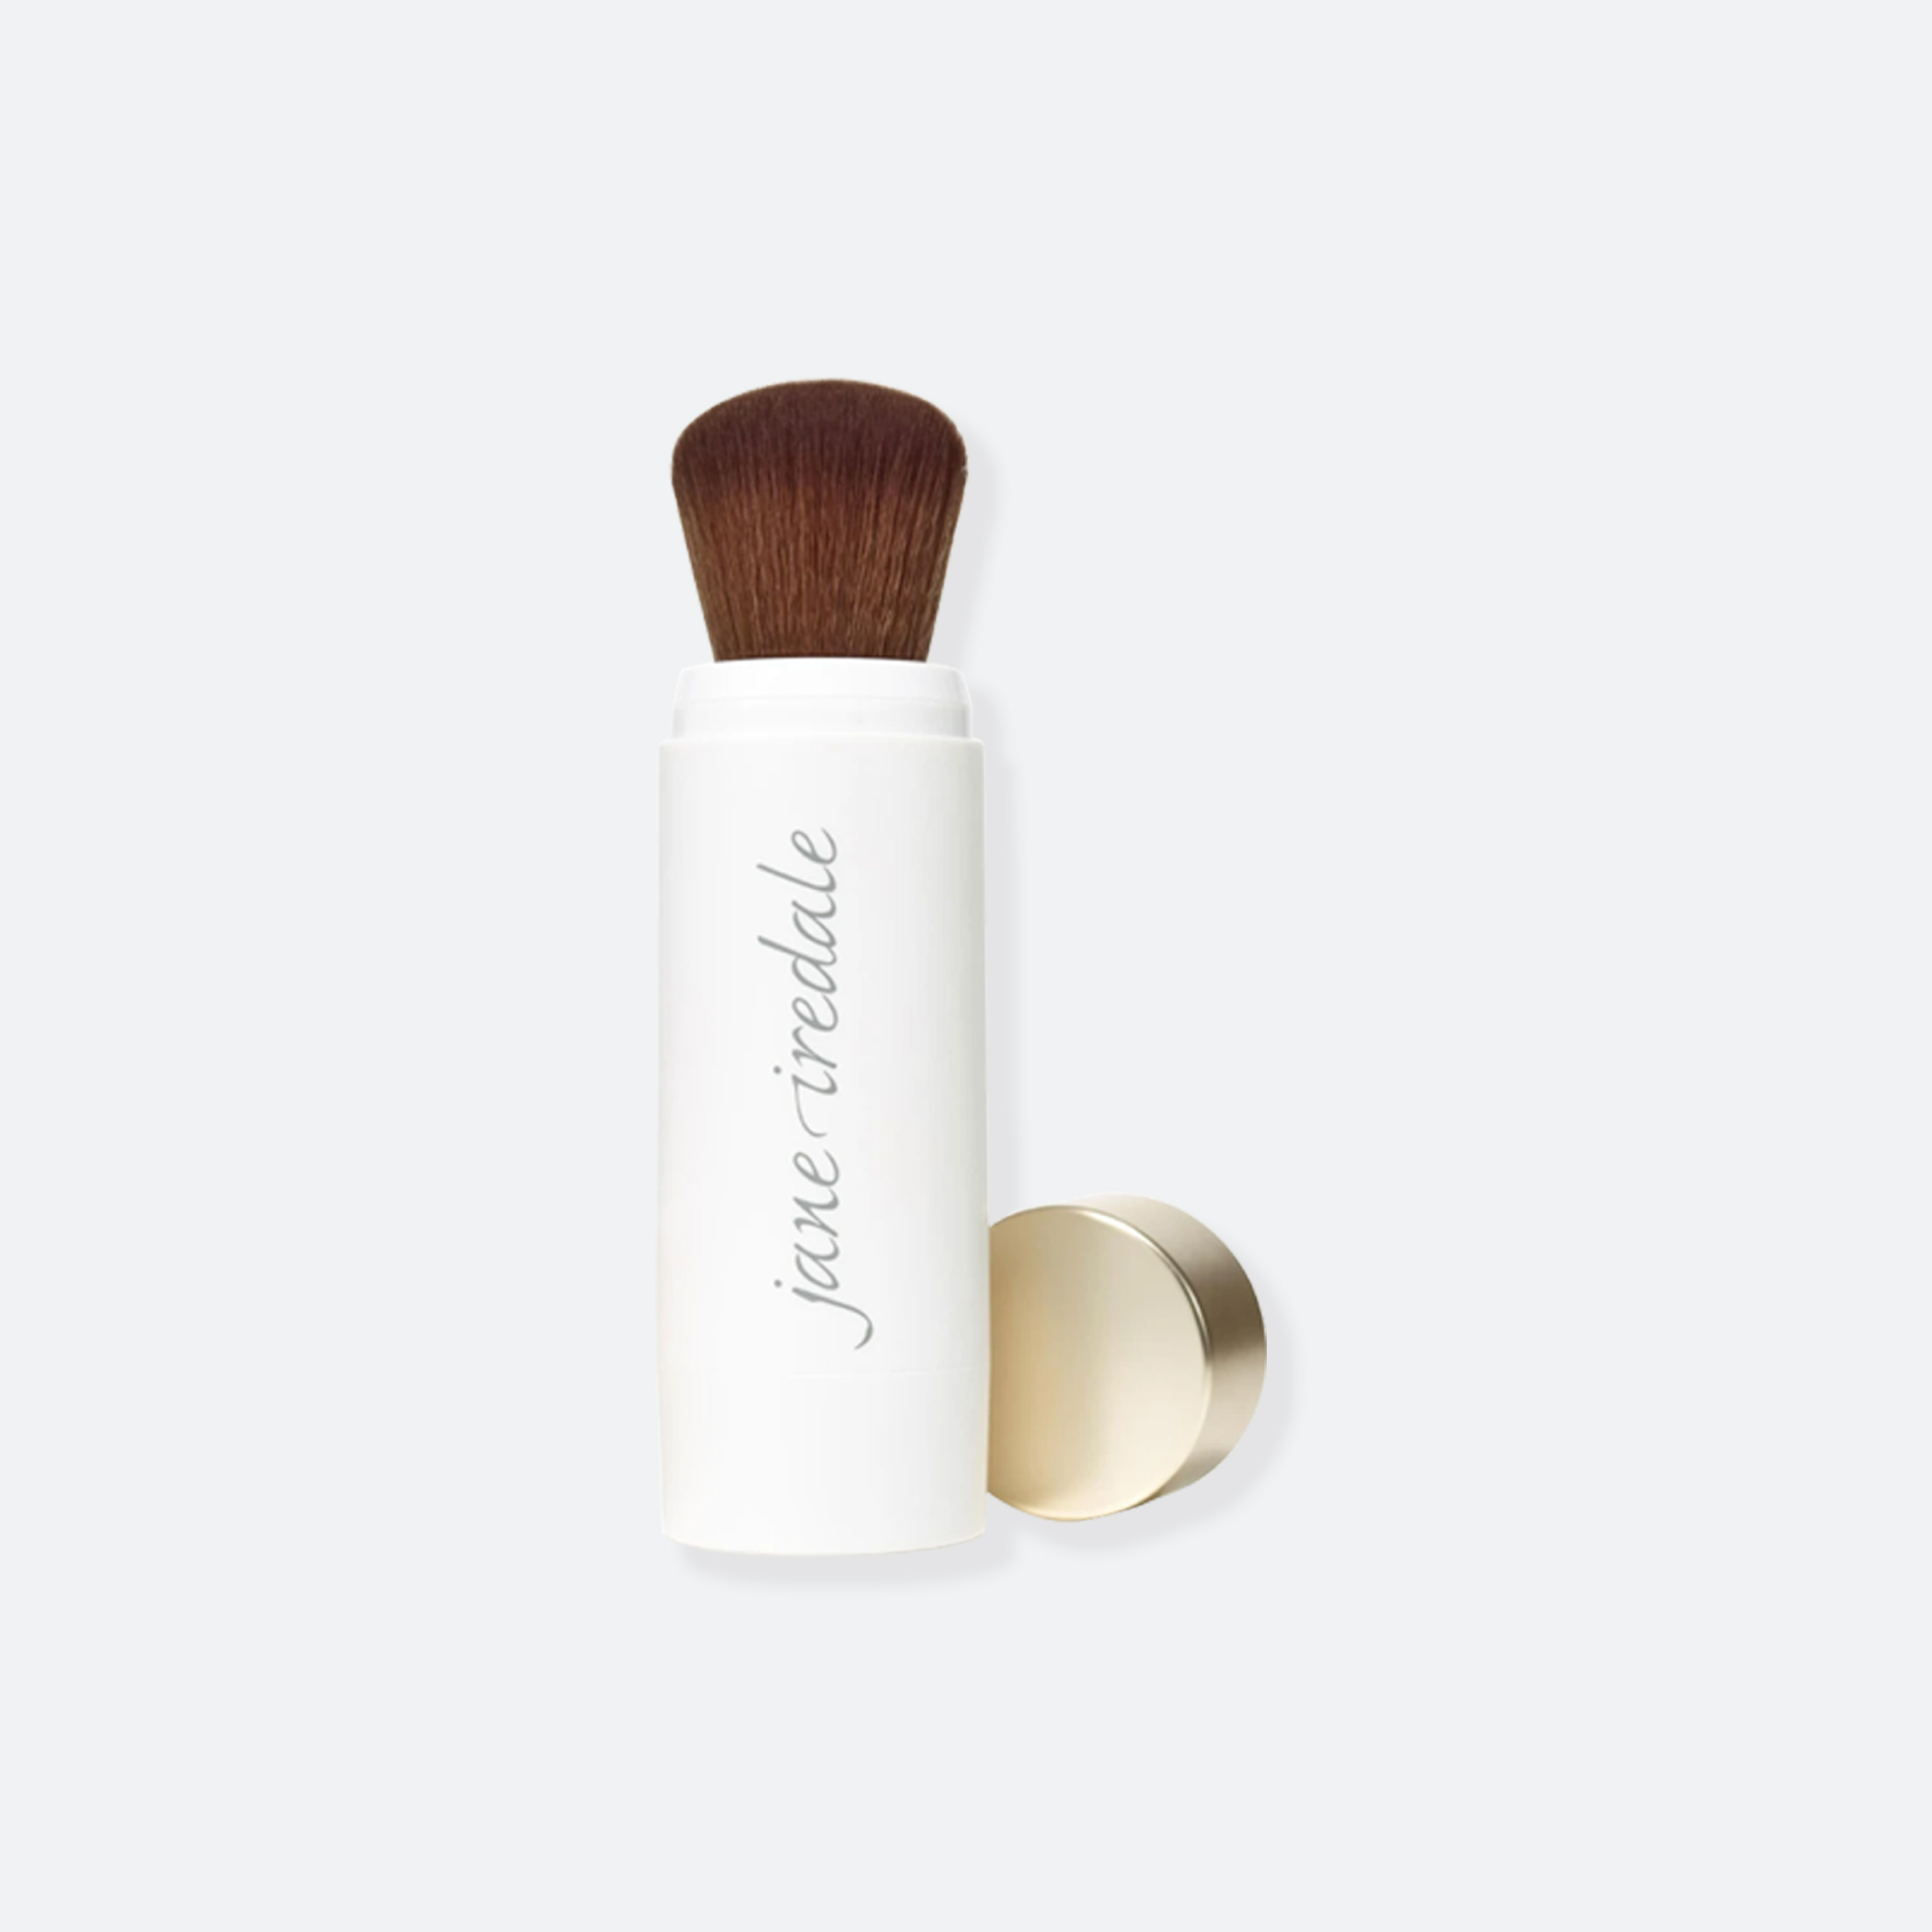 OhMart Jane iredale Powder-Me SPF Dry Sunscreen Refillable Brush (Nude) 3